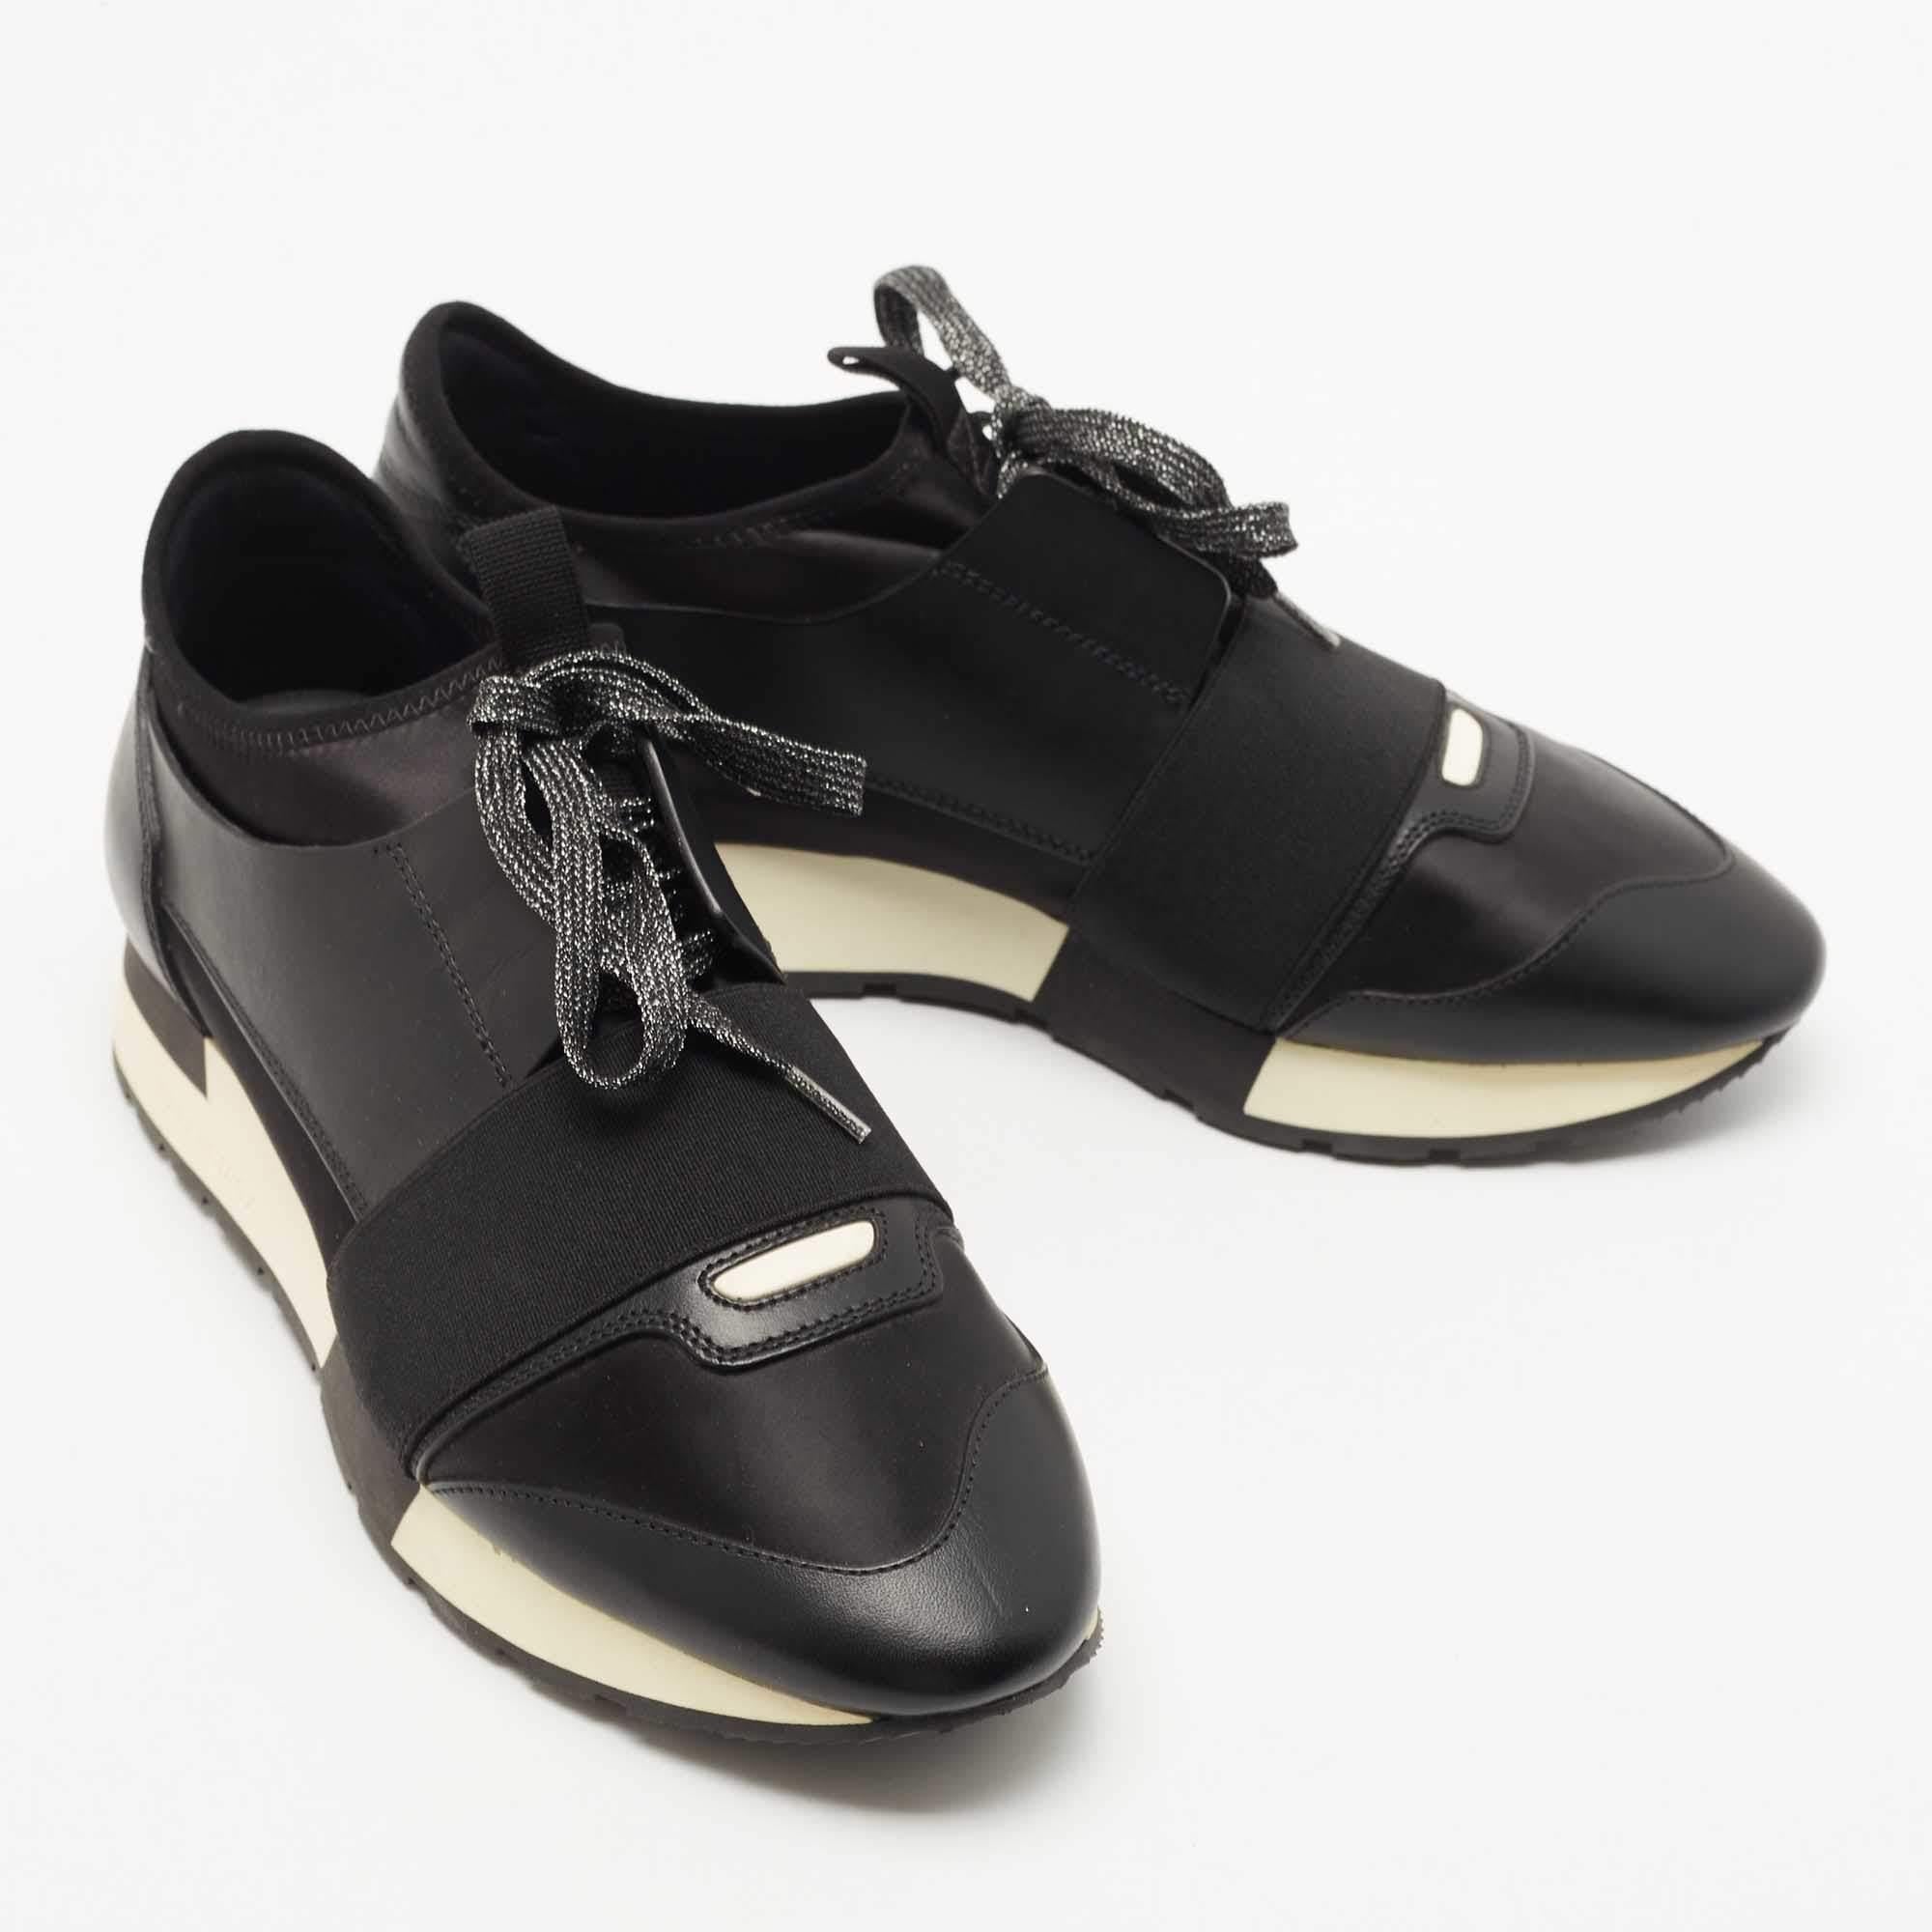 The Balenciaga Race Runners flaunt covered toes, strap detailing on the vamps, and tie-up fastenings. They are complete with a leather lined insole and a tough base to provide maximum comfort when walking. The sneakers are perfect for a fun day out